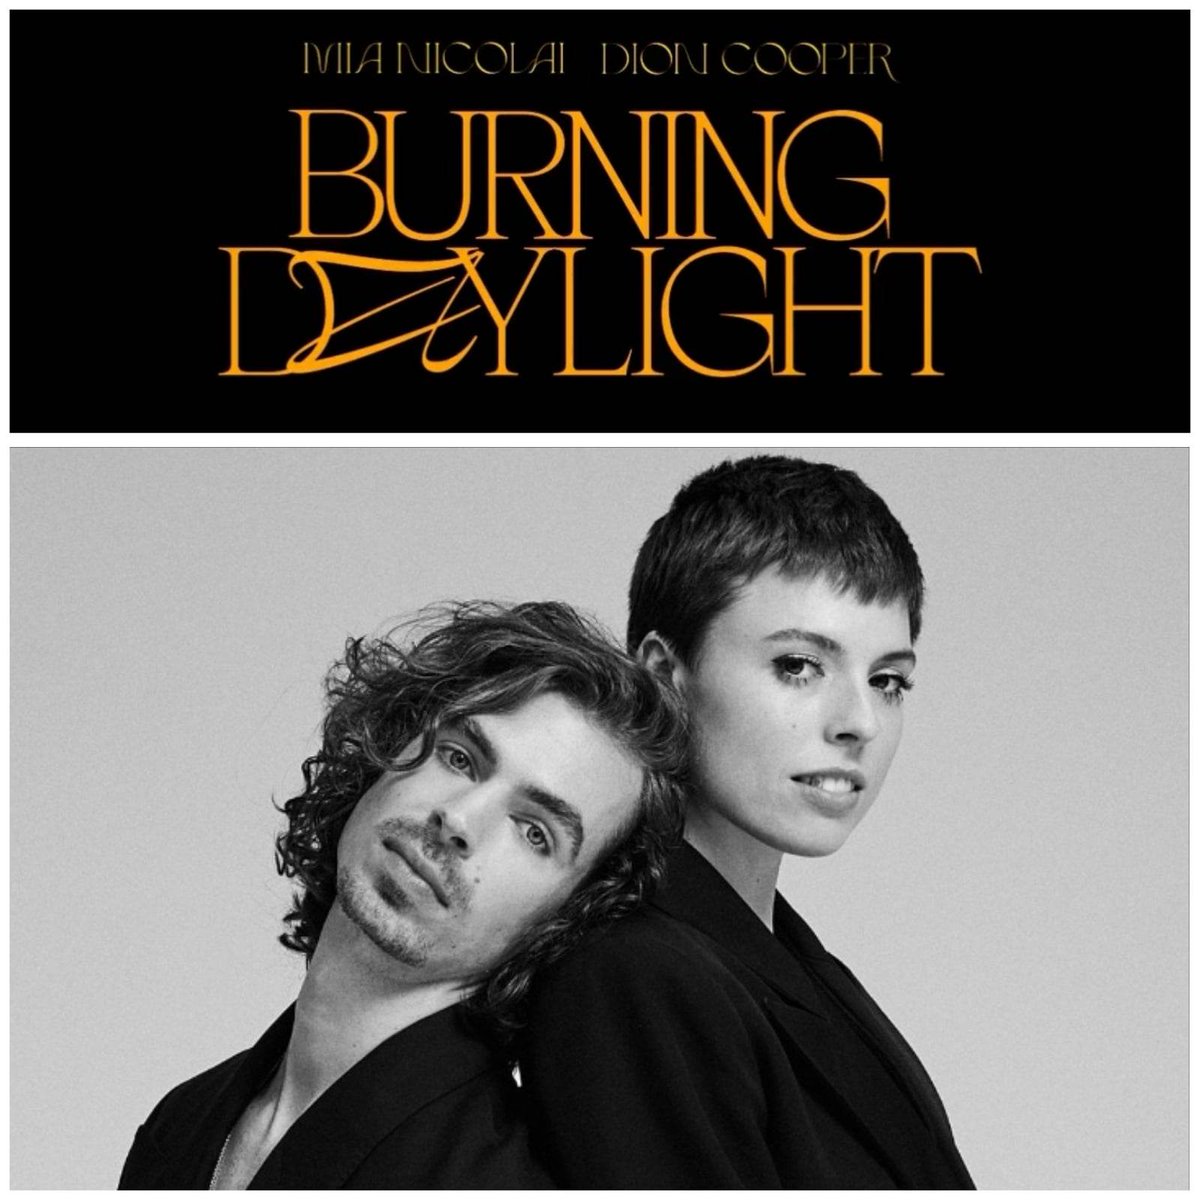 #Chasingheigts aka #Burningdaylight is out now #Thenetherlands #Eurovision #MiaNicolai #DionCooper #DuncanLaurence 
Life after Helsinki 2007 Eurovision: EUROVISION 2023: THE DUTCH ENTRY BURNING DAYLIGHT ... https://t.co/h2gnJ6GbWh https://t.co/mfxT3gAPBL